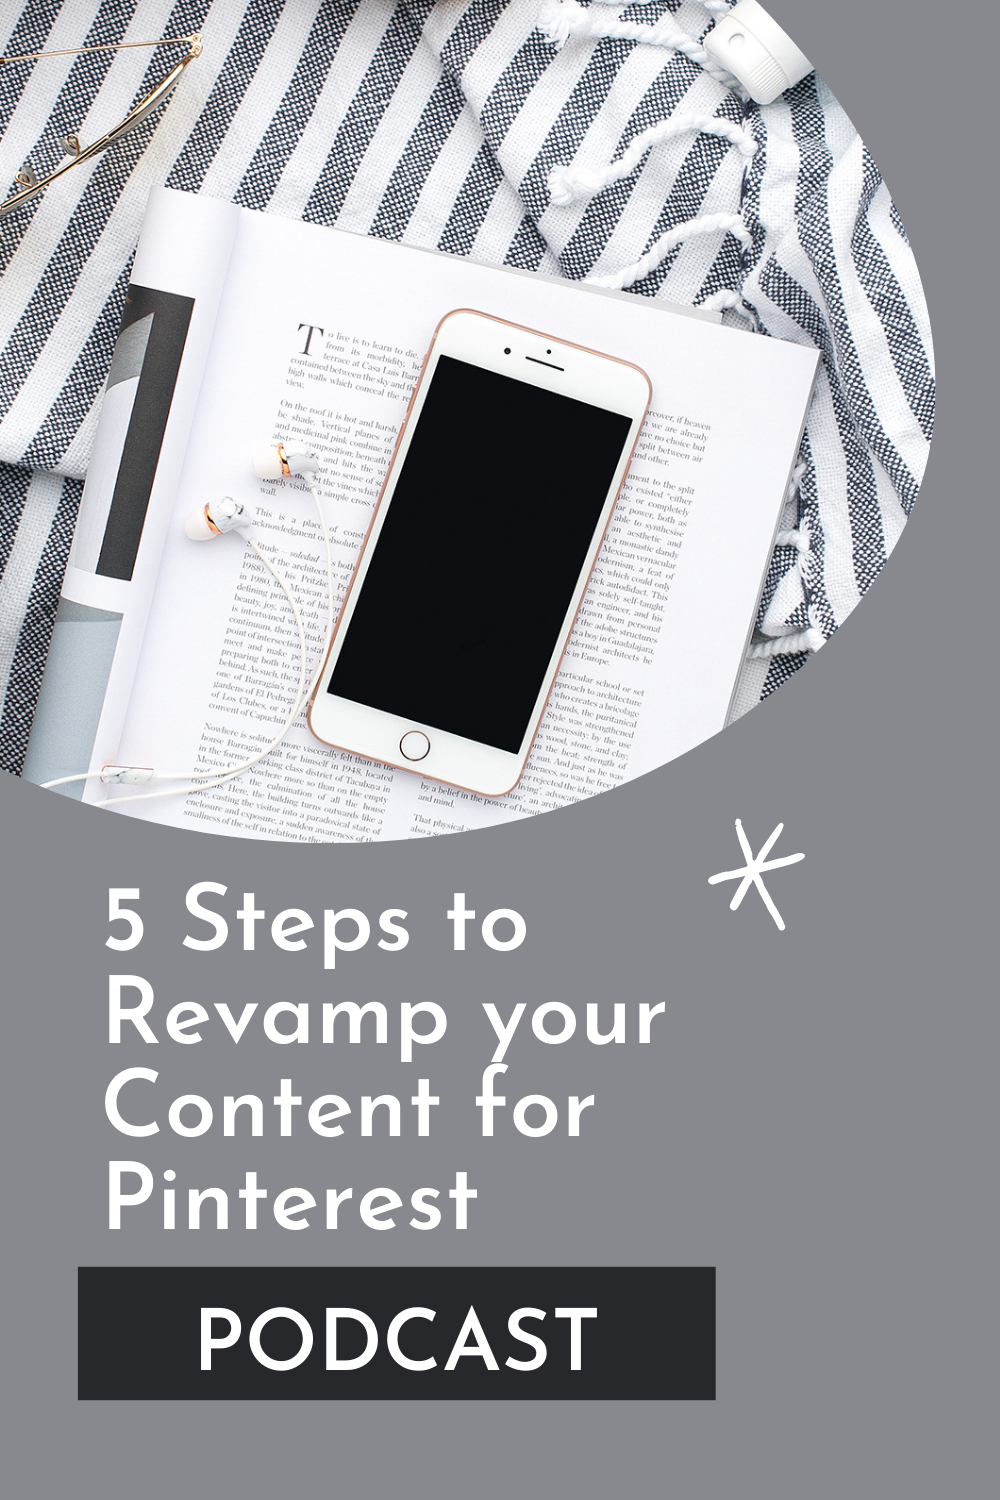 5 Steps to Revamp your Content for Pinterest